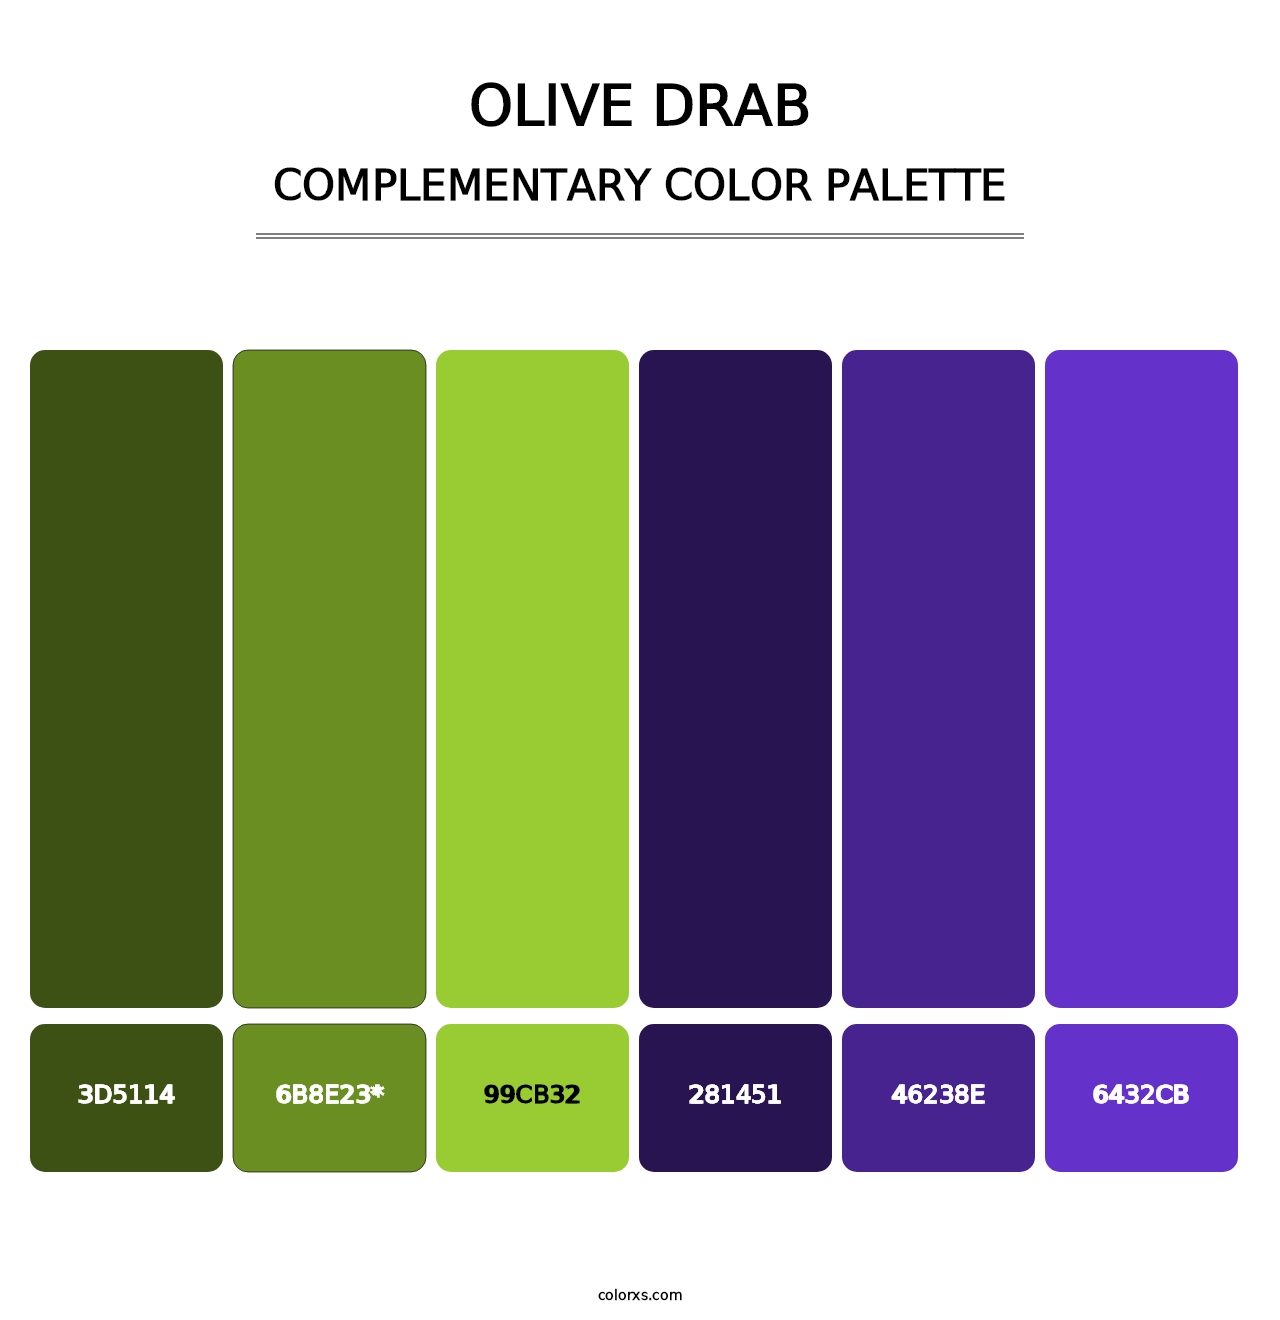 Olive Drab - Complementary Color Palette